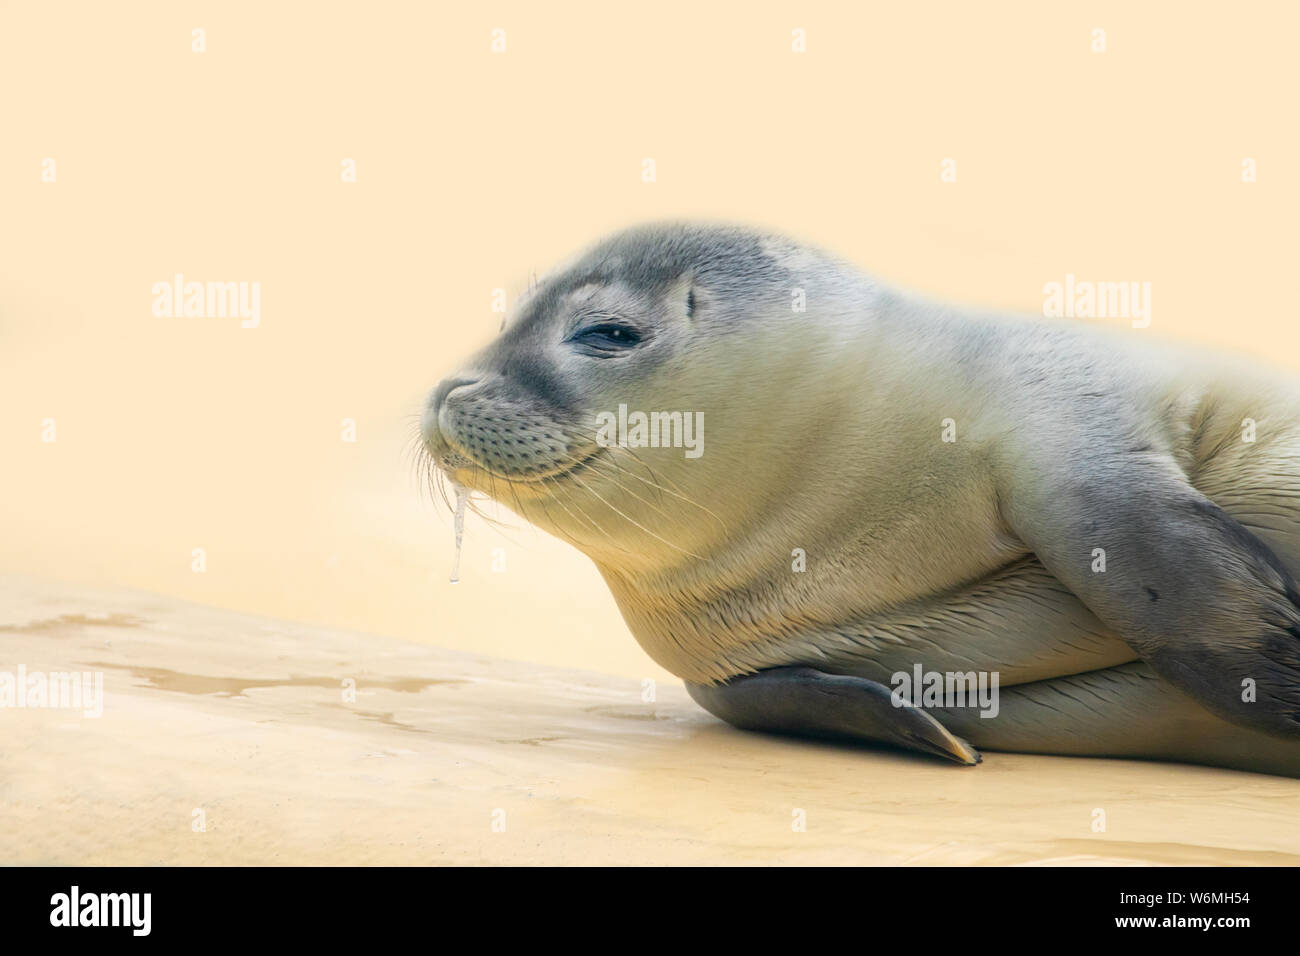 drooling baby seal on sand background Stock Photo